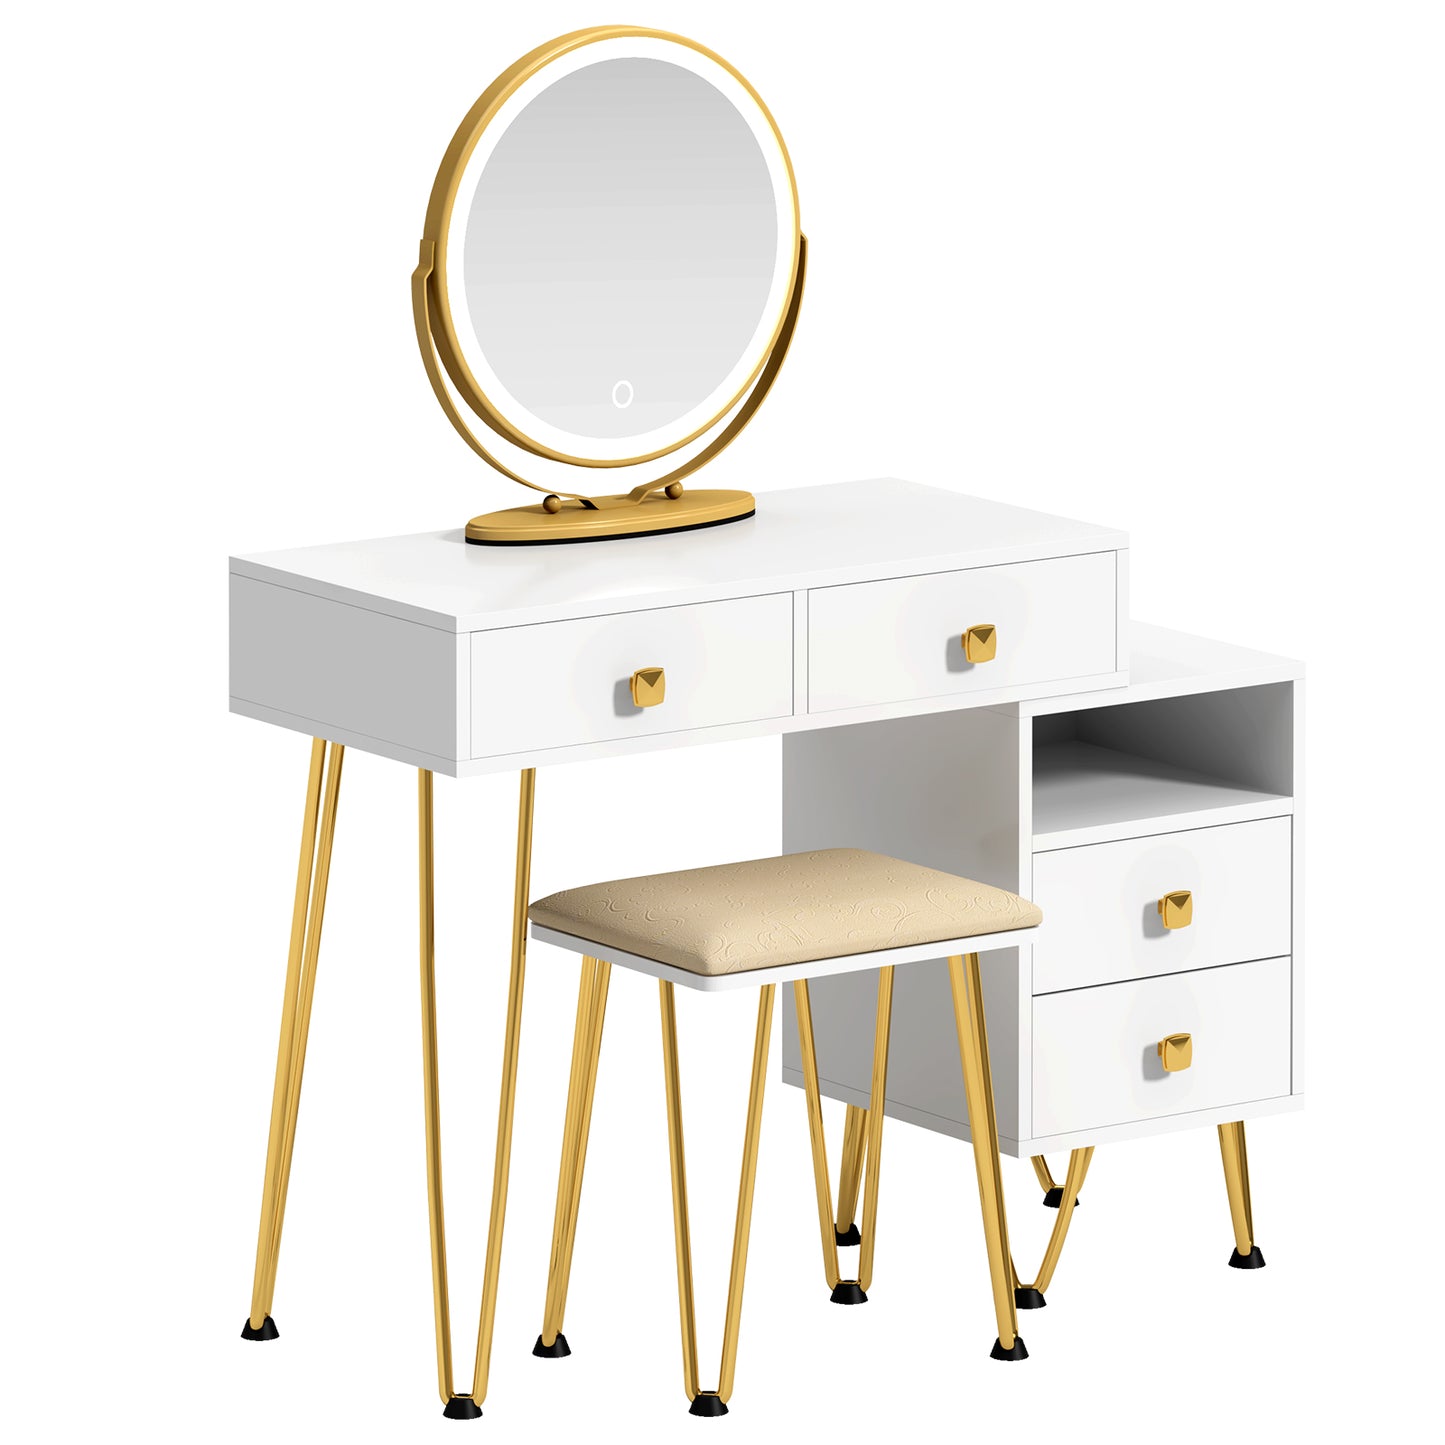 Soges White Dressing Table with Garden Mirror - Stylish Design, Fashion Dressing Table with Solid Wood Frame, Christmas, Valentine's Day Gift